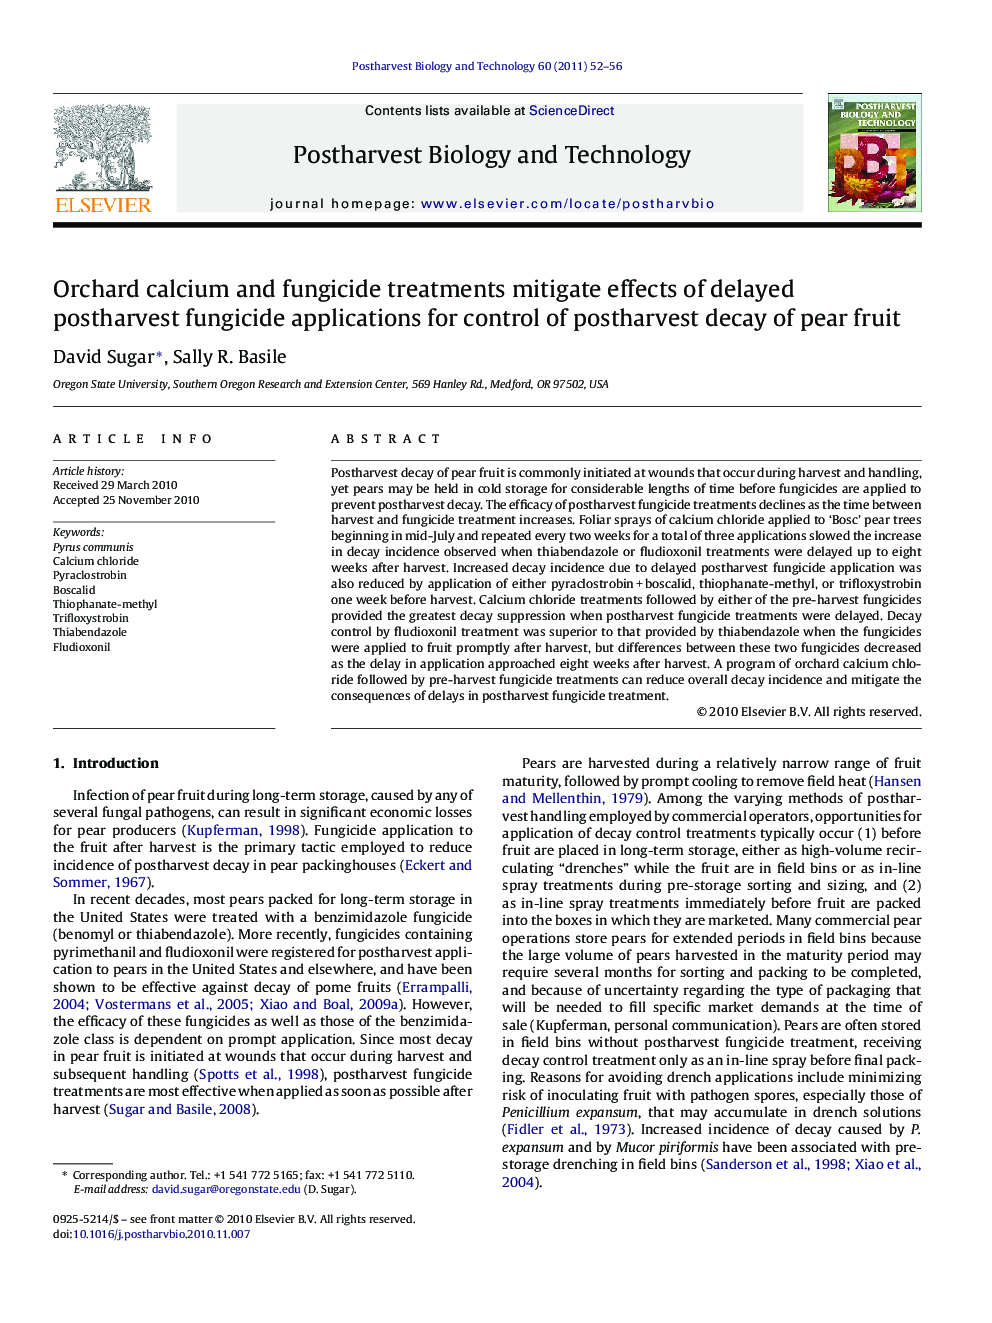 Orchard calcium and fungicide treatments mitigate effects of delayed postharvest fungicide applications for control of postharvest decay of pear fruit